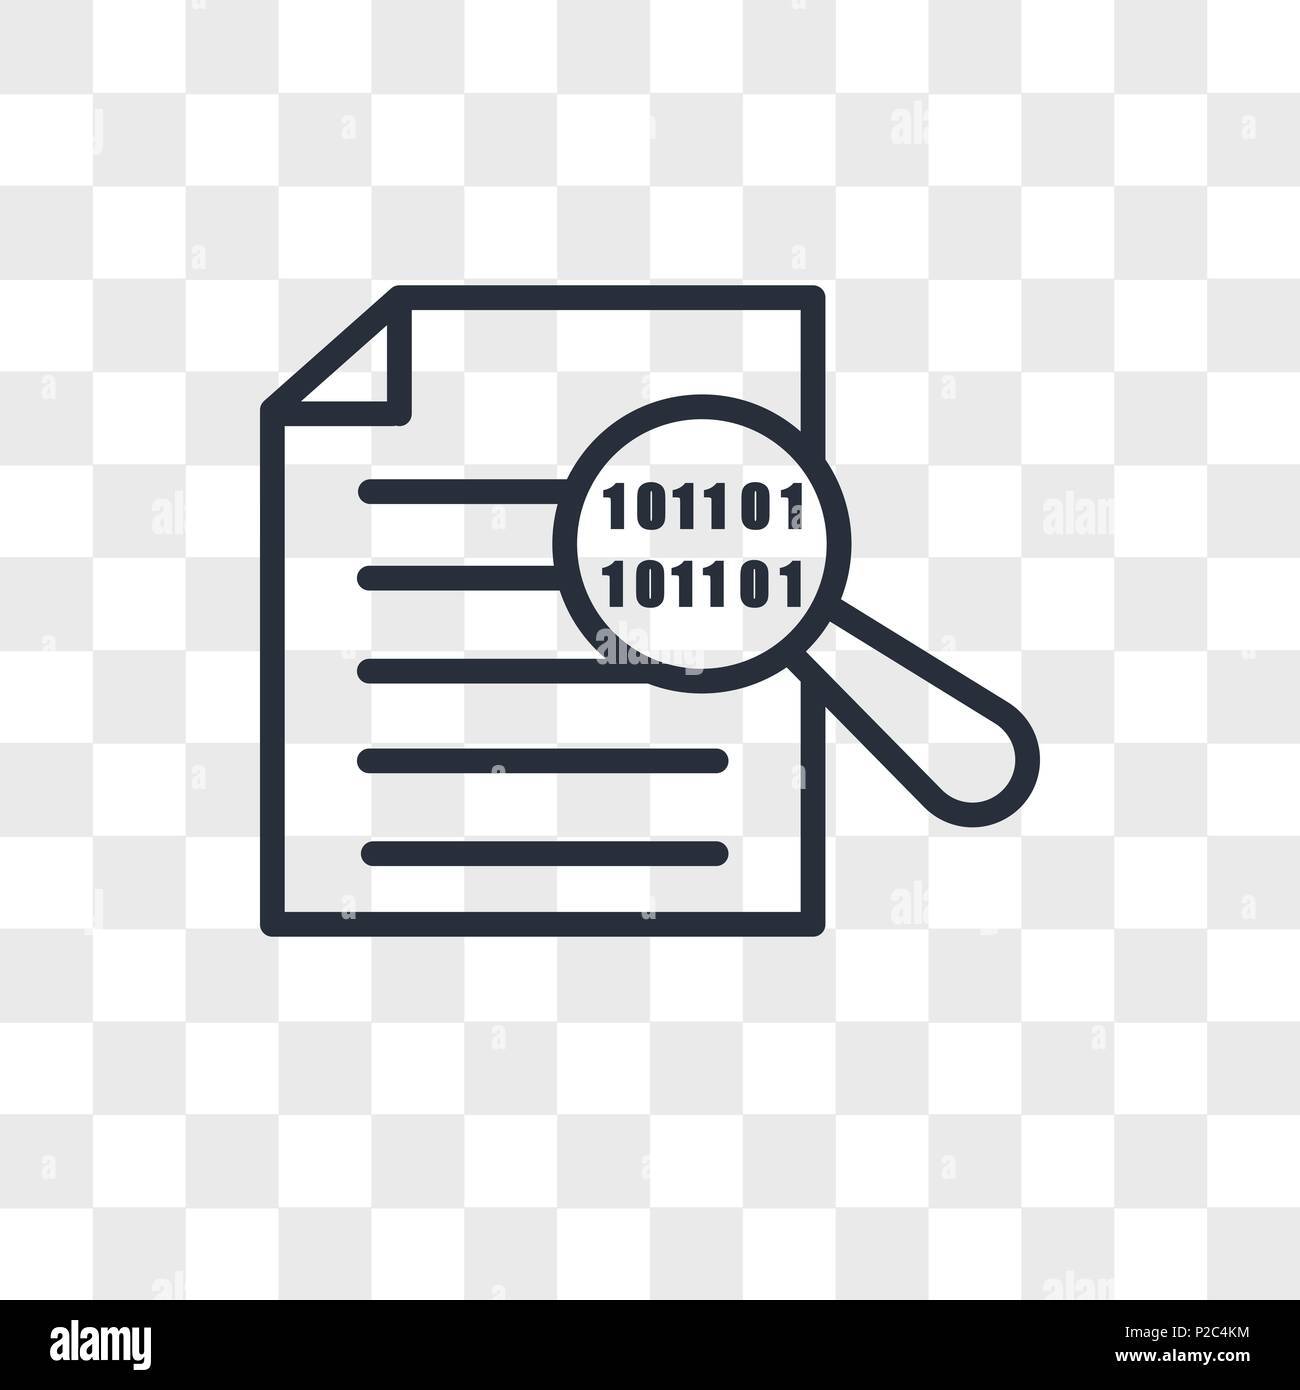 data integrity vector icon isolated on transparent background, data integrity logo concept Stock Vector